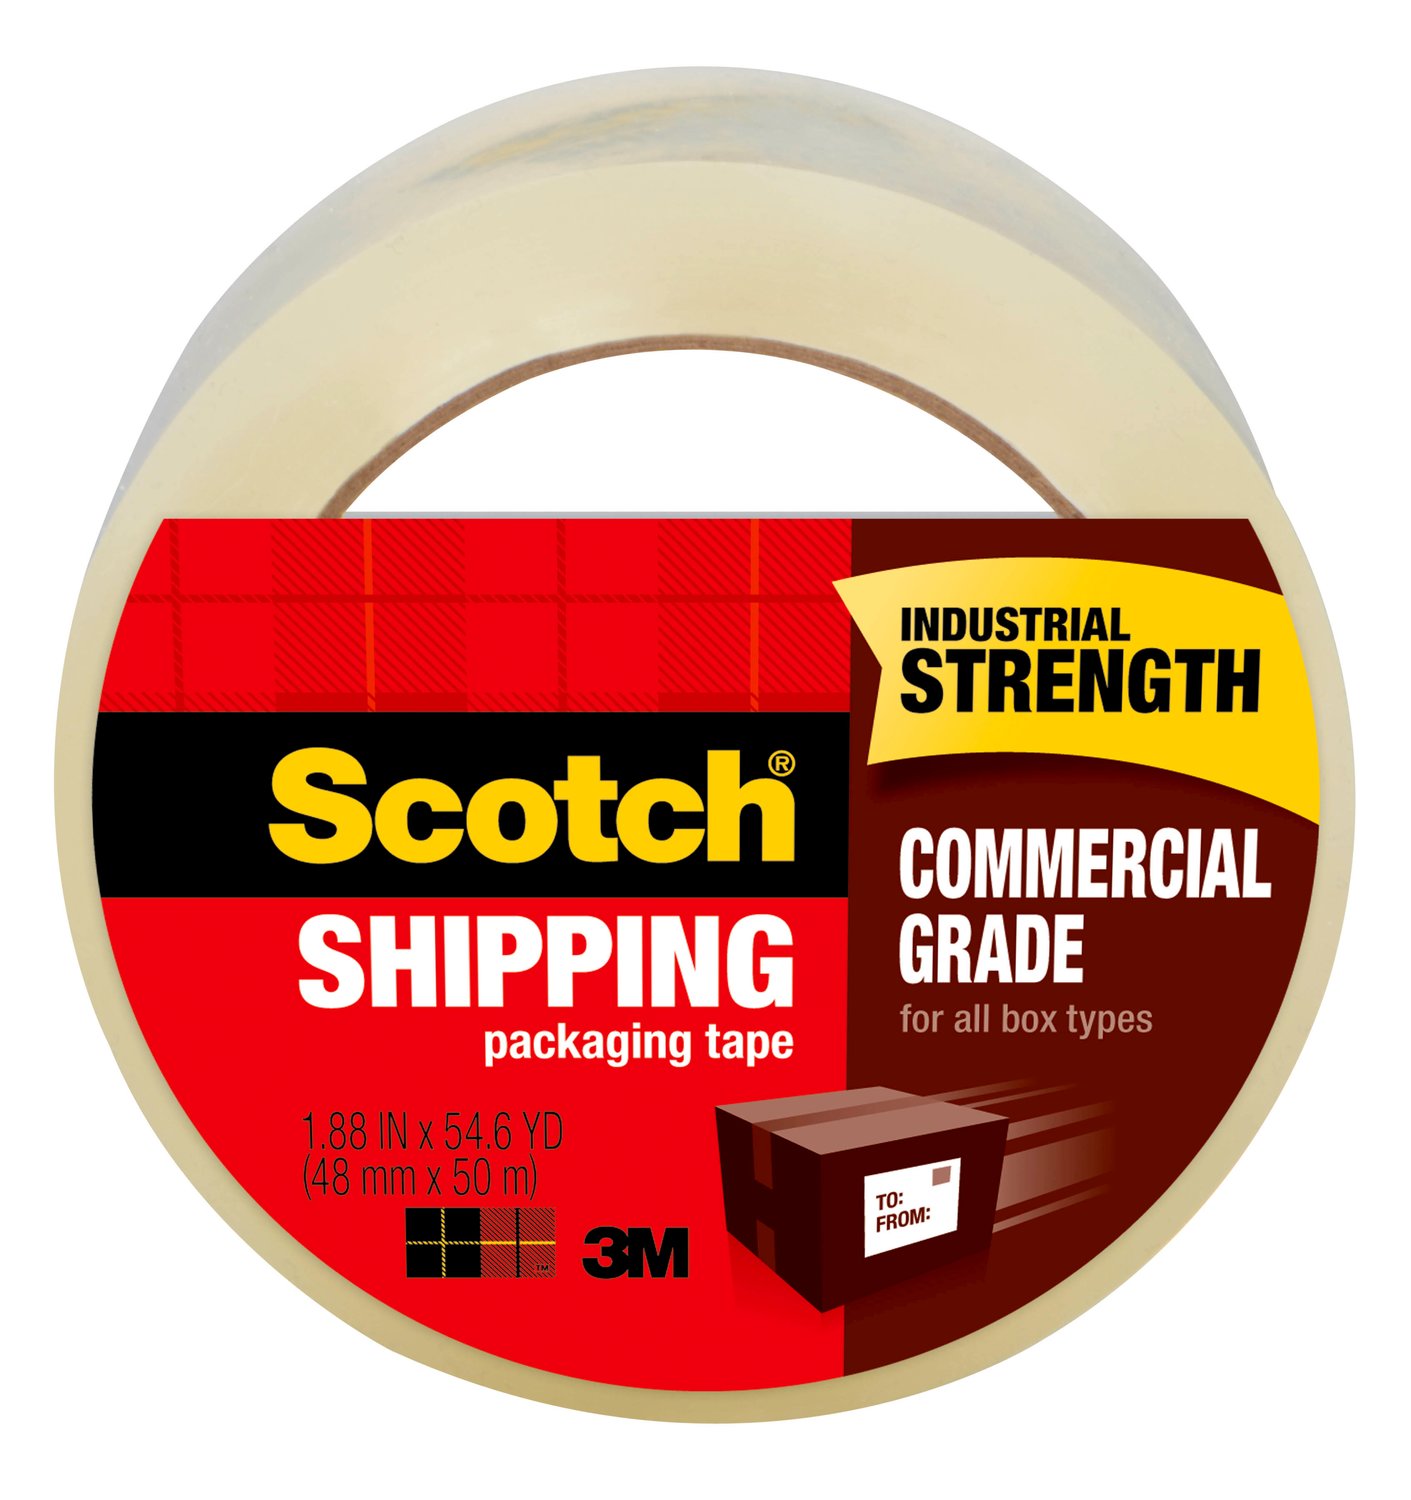 7010311010 - Scotch Commercial Grade Shipping Packaging Tape 3750-CS48, 1.88 in x
54.6 yd (48 mm x 50 m) Case Value Pack